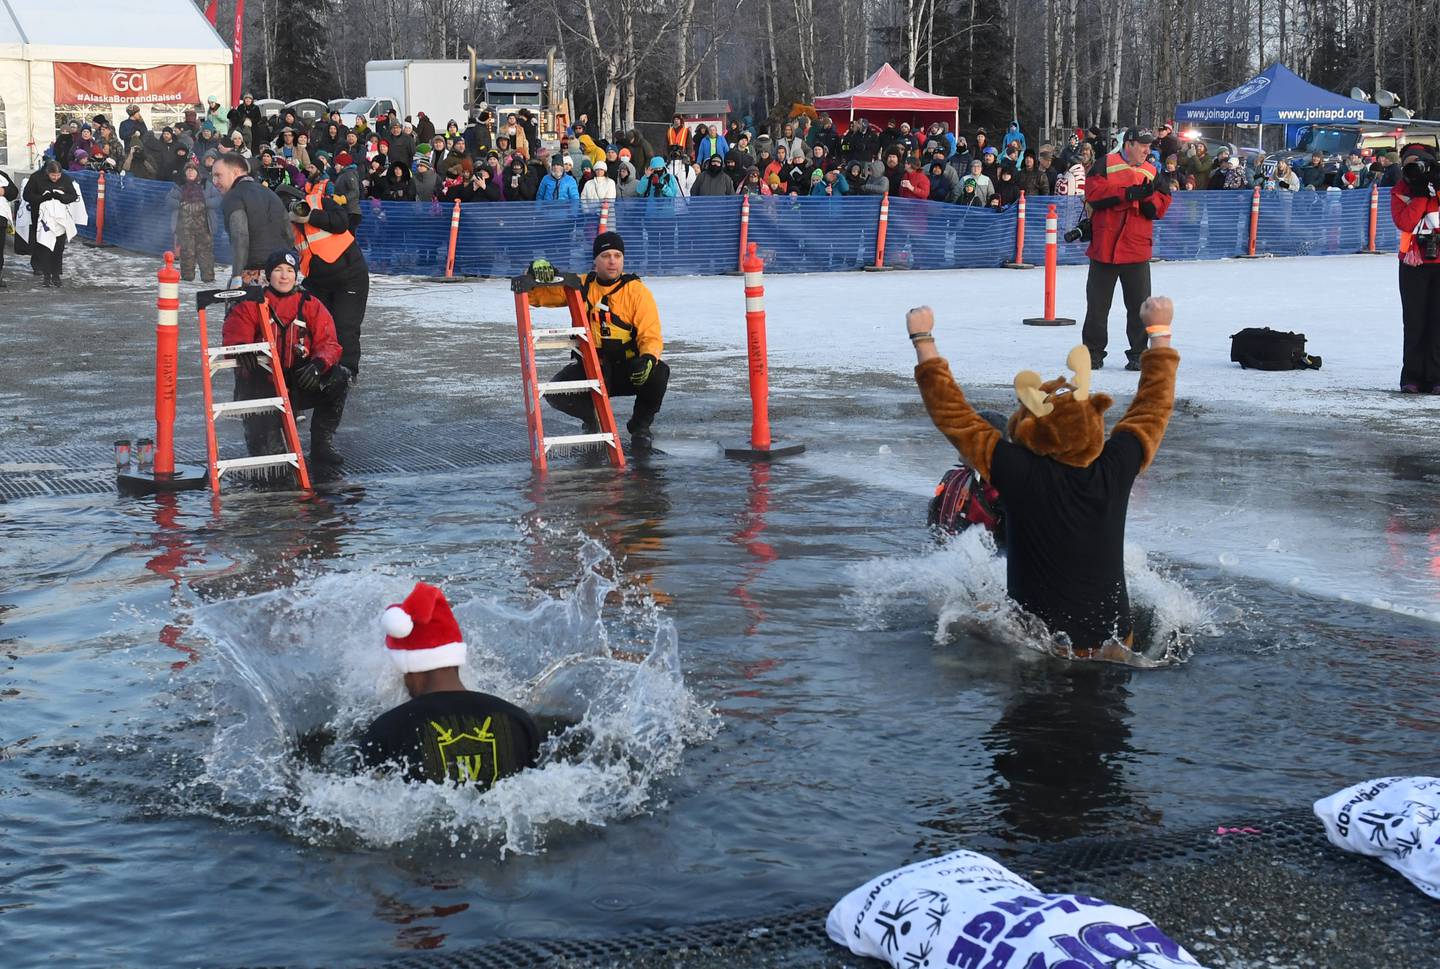 Hundreds take an icy leap at the annual Polar Plunge